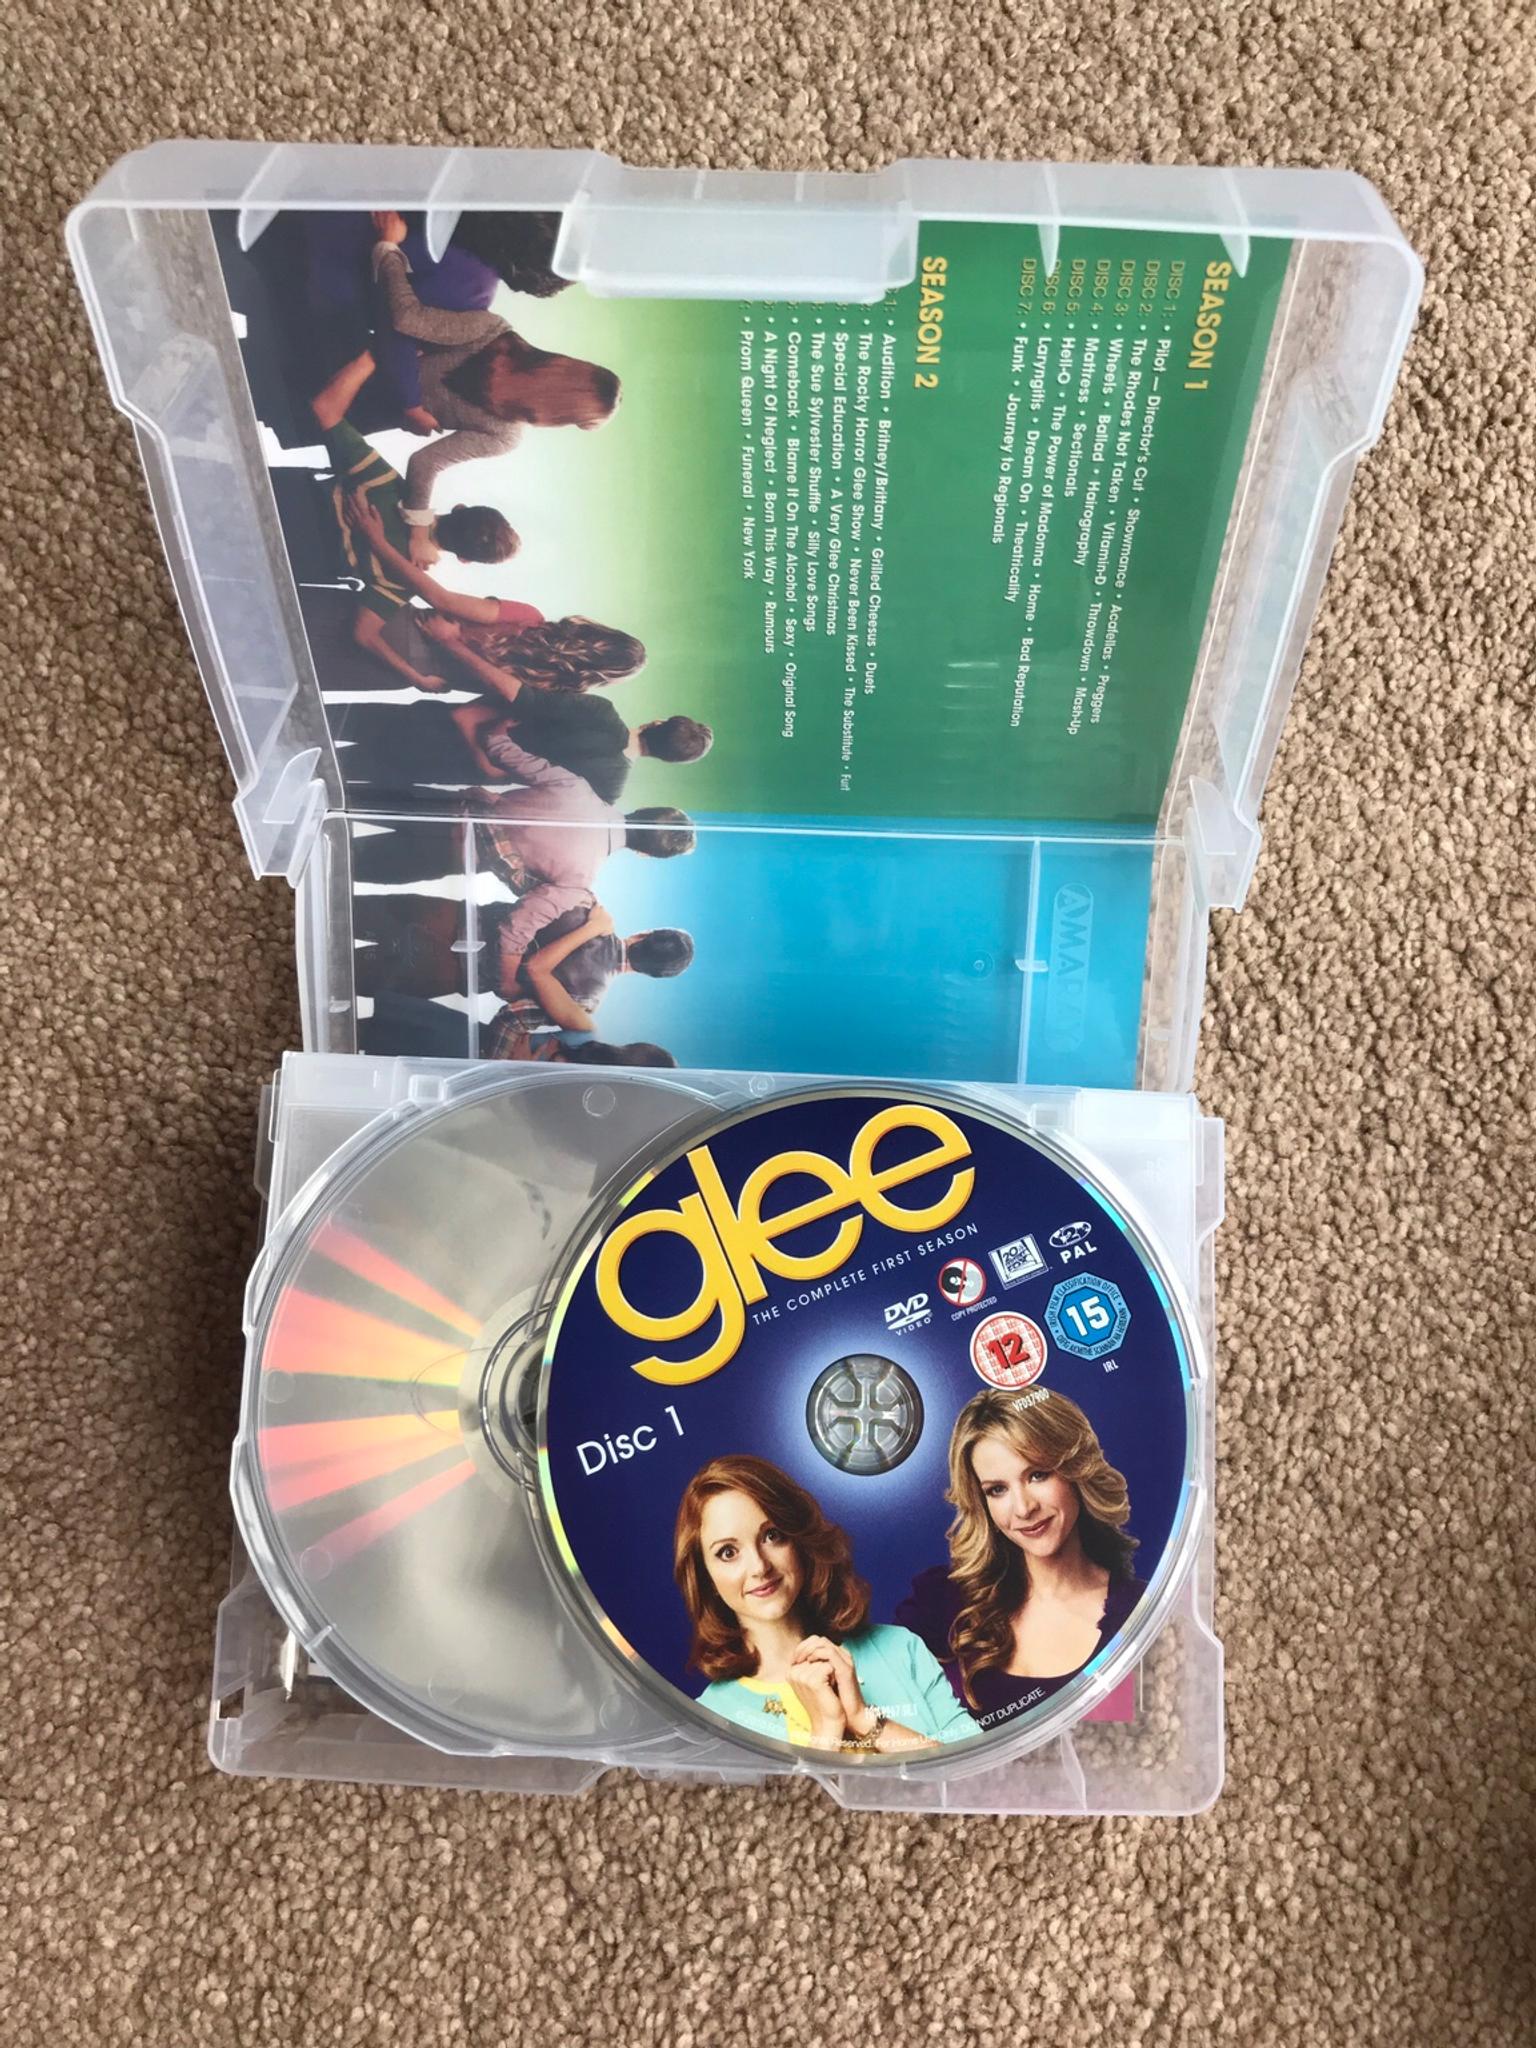 New Glee Complete Box Set Seasons 1 6 In Me12 Swale For 40 00 For Sale Shpock